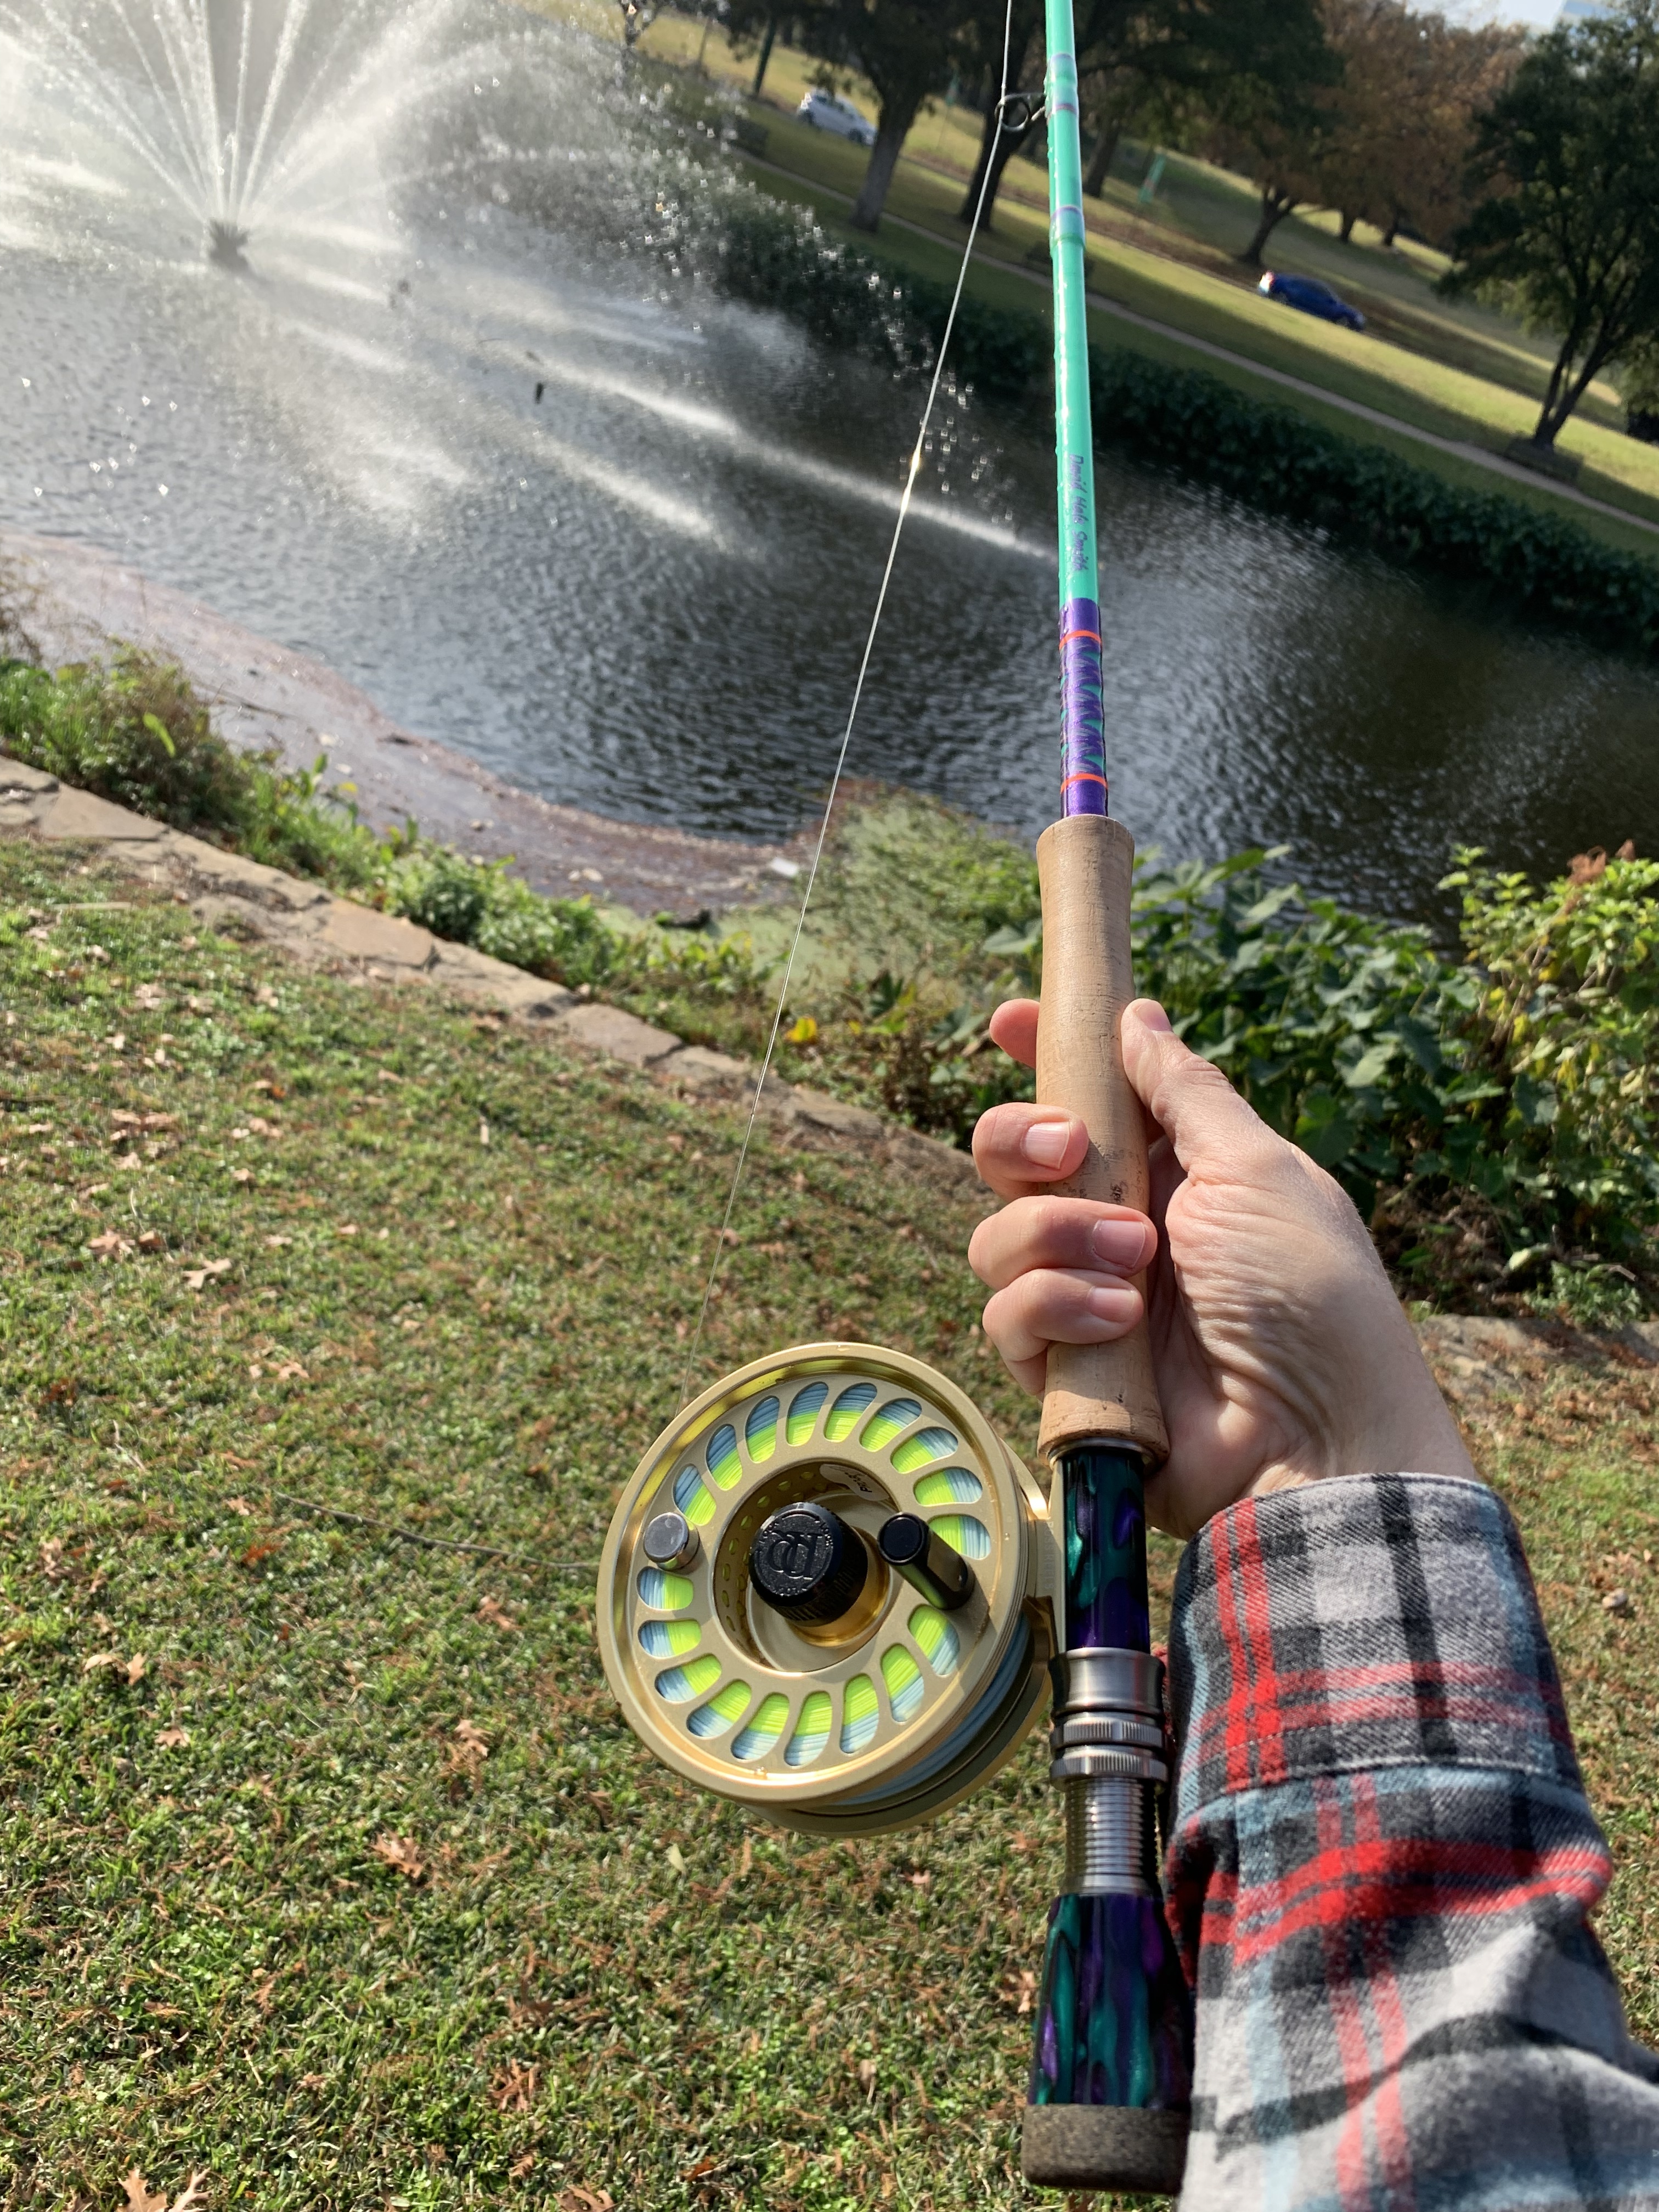 I screwed up and now I need a 10wt, Fishing with Fiberglass Fly Rods